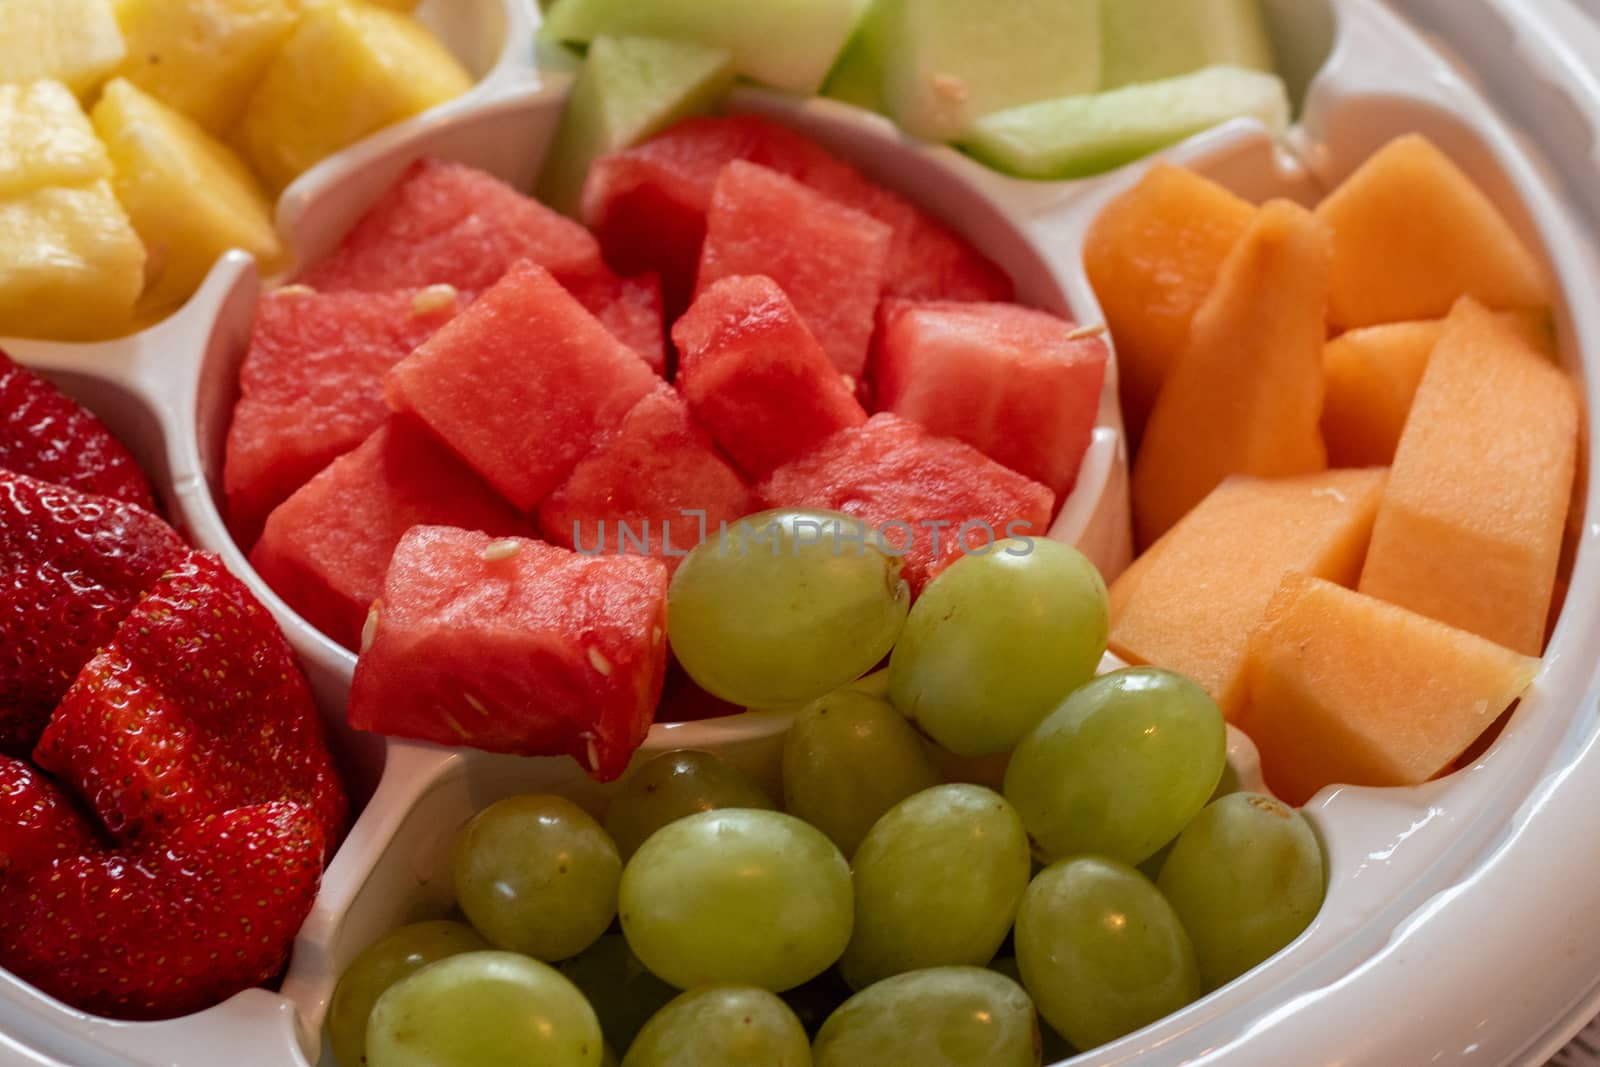 A platter of fruit, consisting of watermelon, cantaloupe, green grapes, strawberries, pineapple and honeydew melon is served in a white plastic tray as a snack.